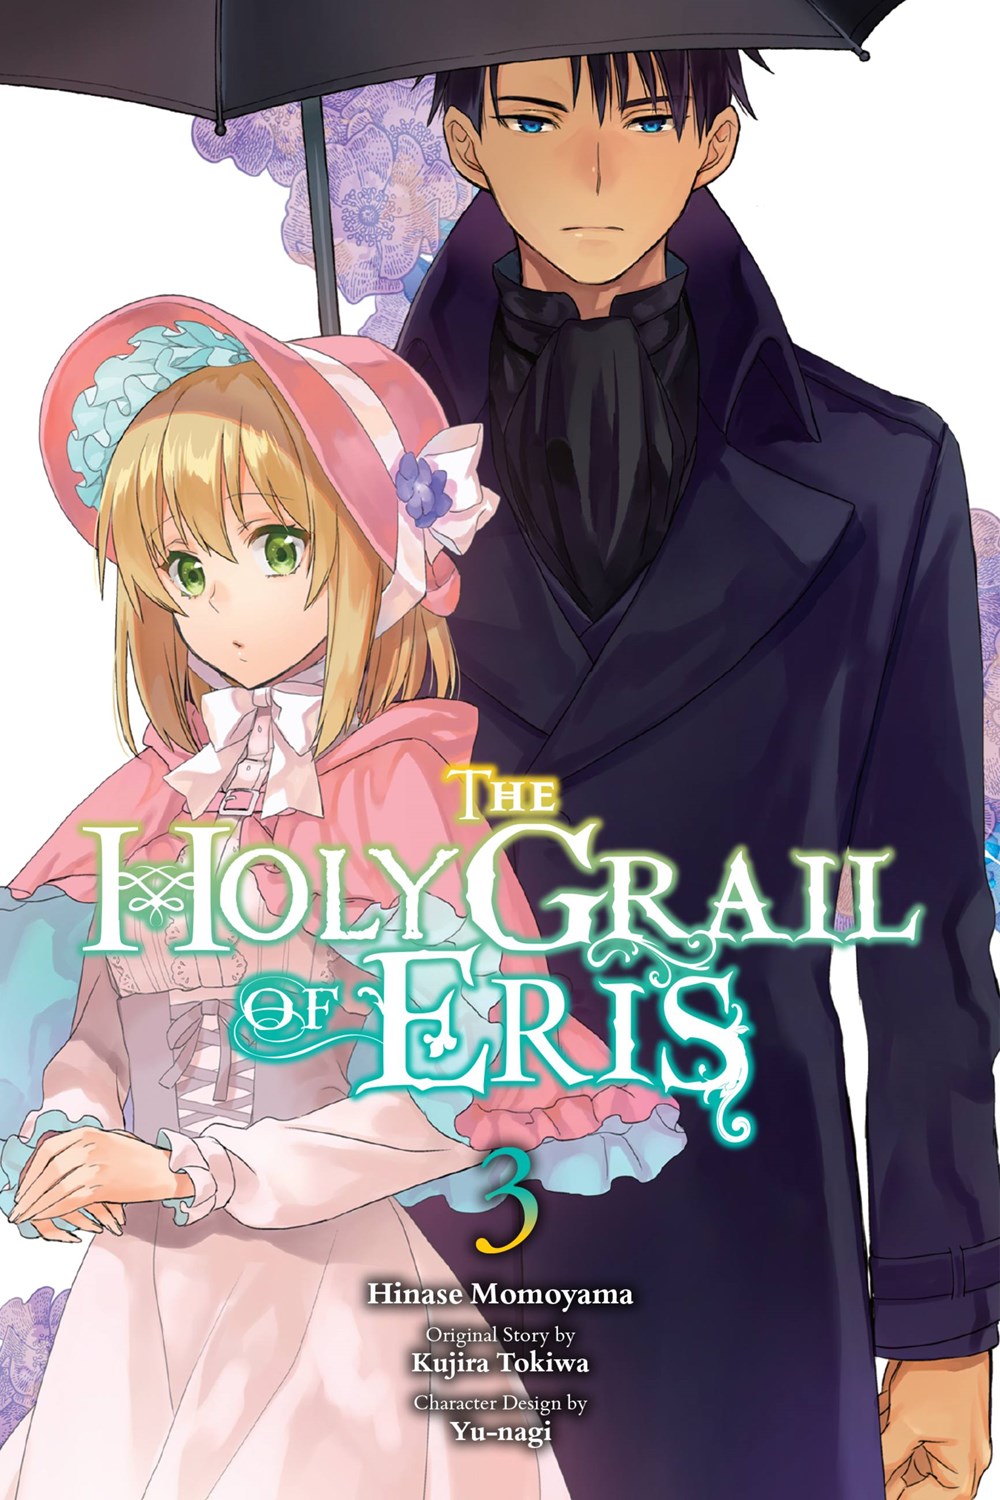 The Holy Grail of Eris Volume 3 Review